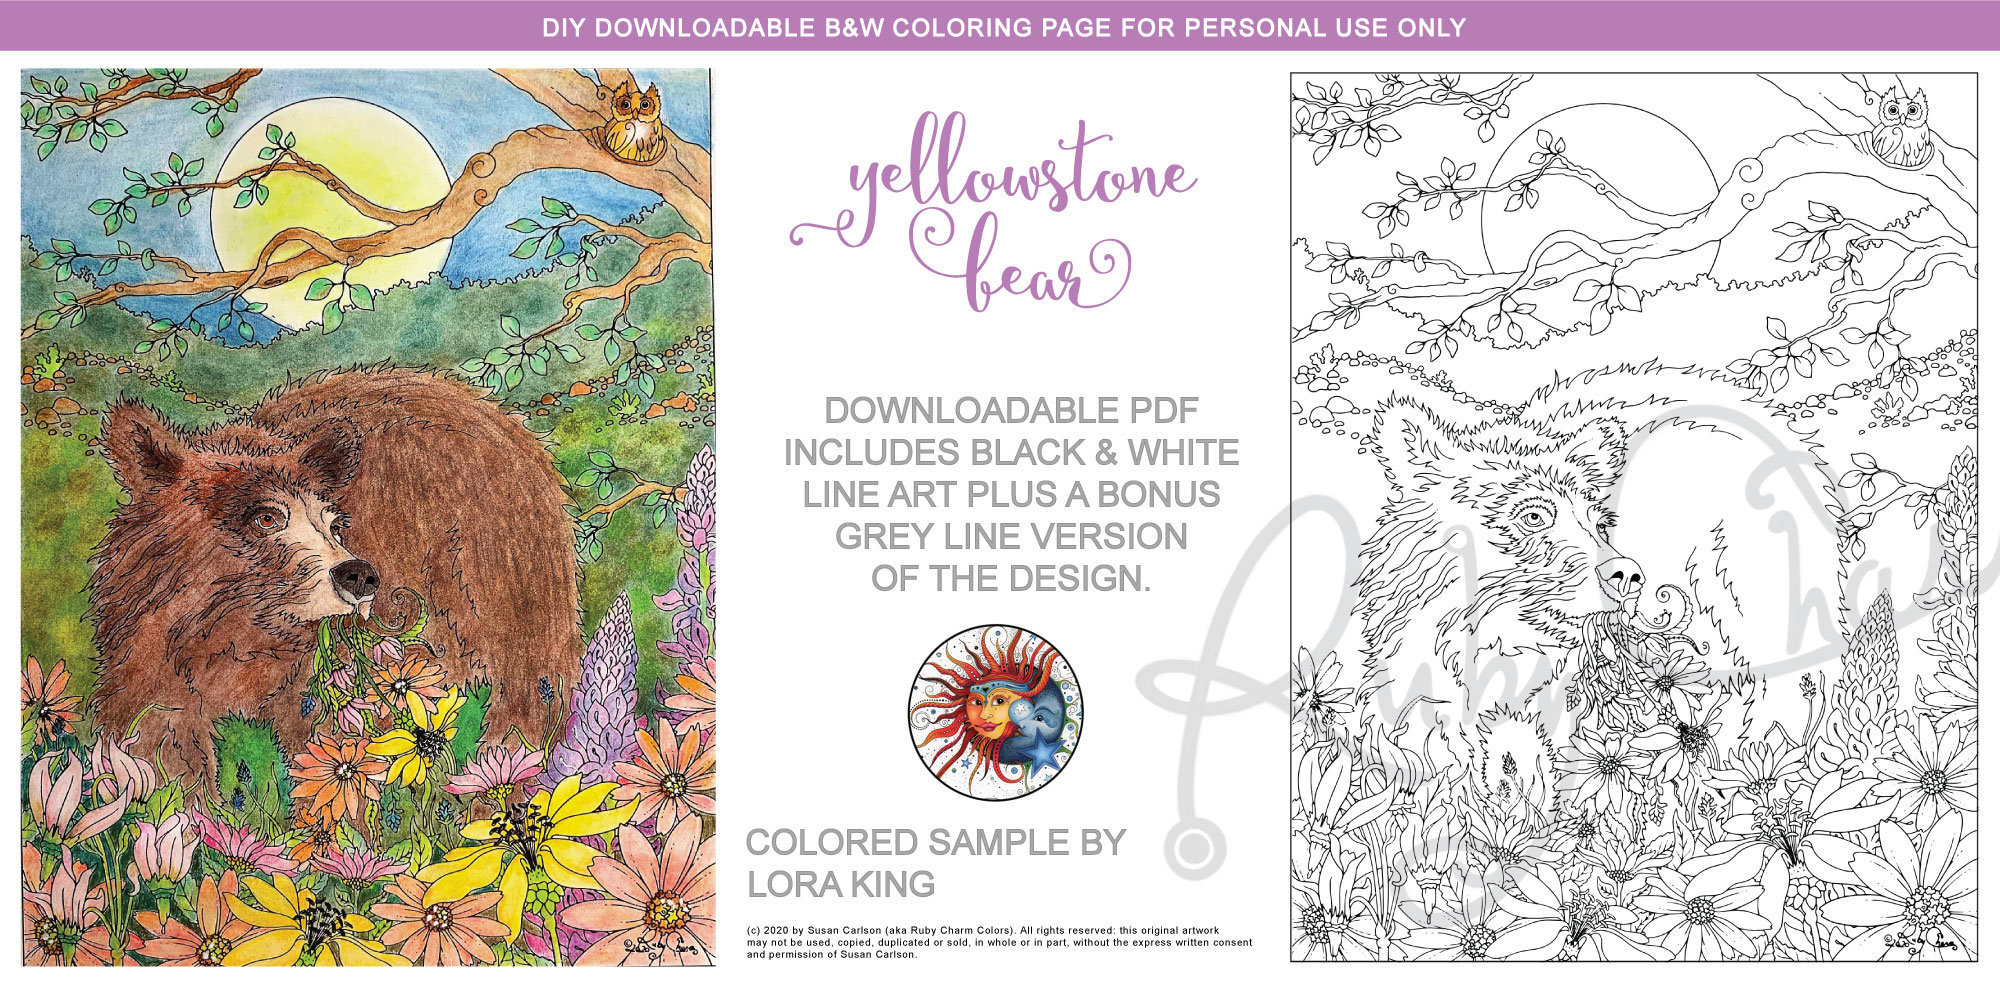 Ruby charm colors yellowstone bear adult coloring page wildlife national park flowers bears owl moon sun